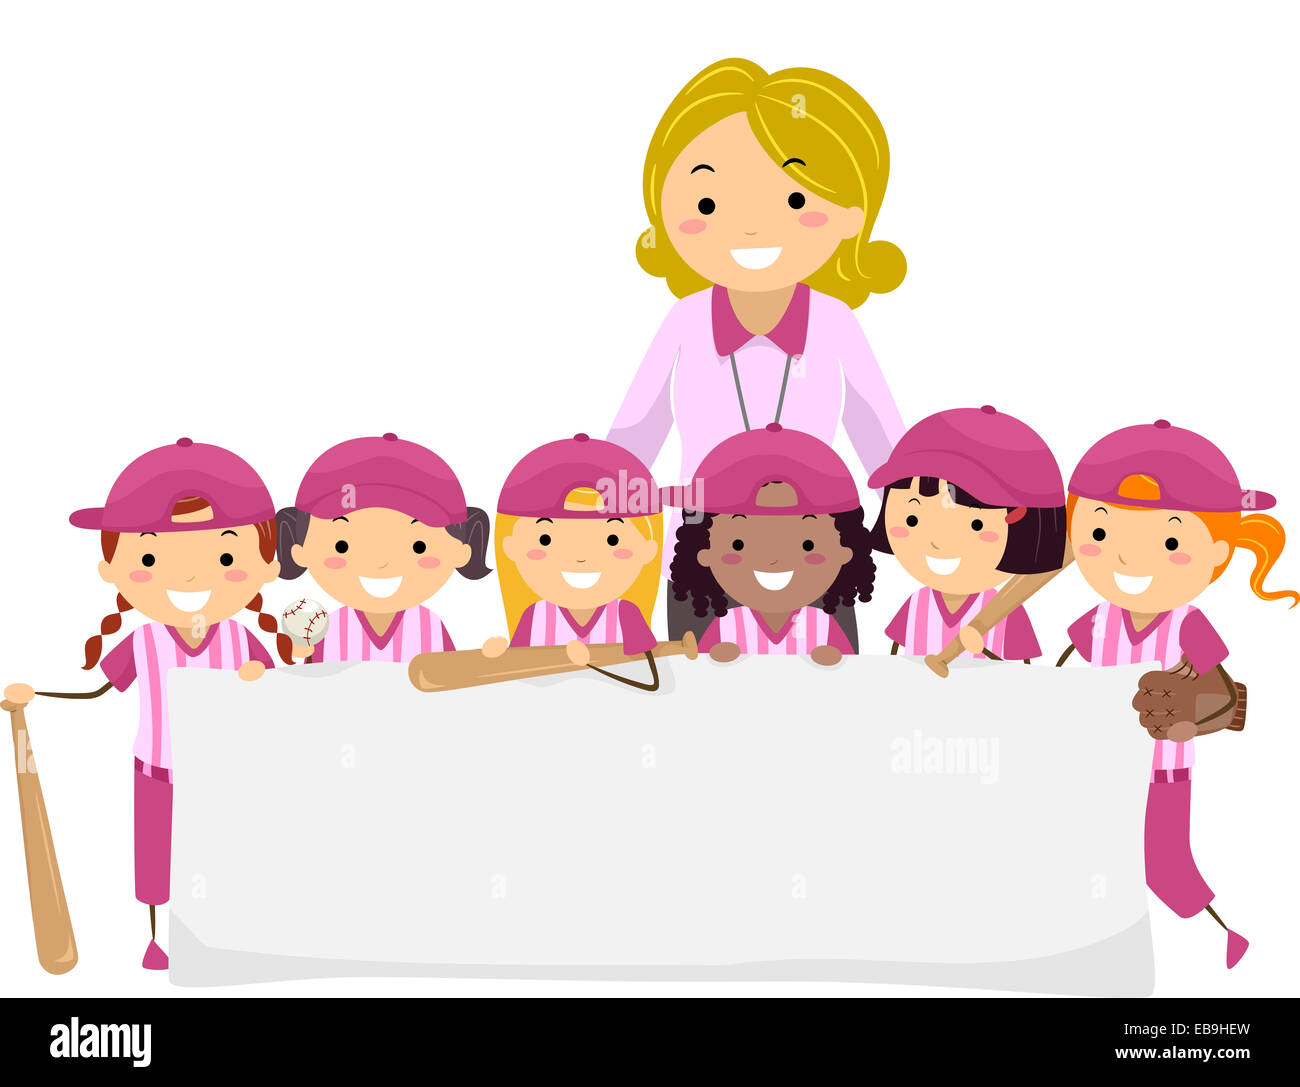 Illustration Featuring a Group of Young Female Baseball Players Holding a Blank Banner Stock Photo